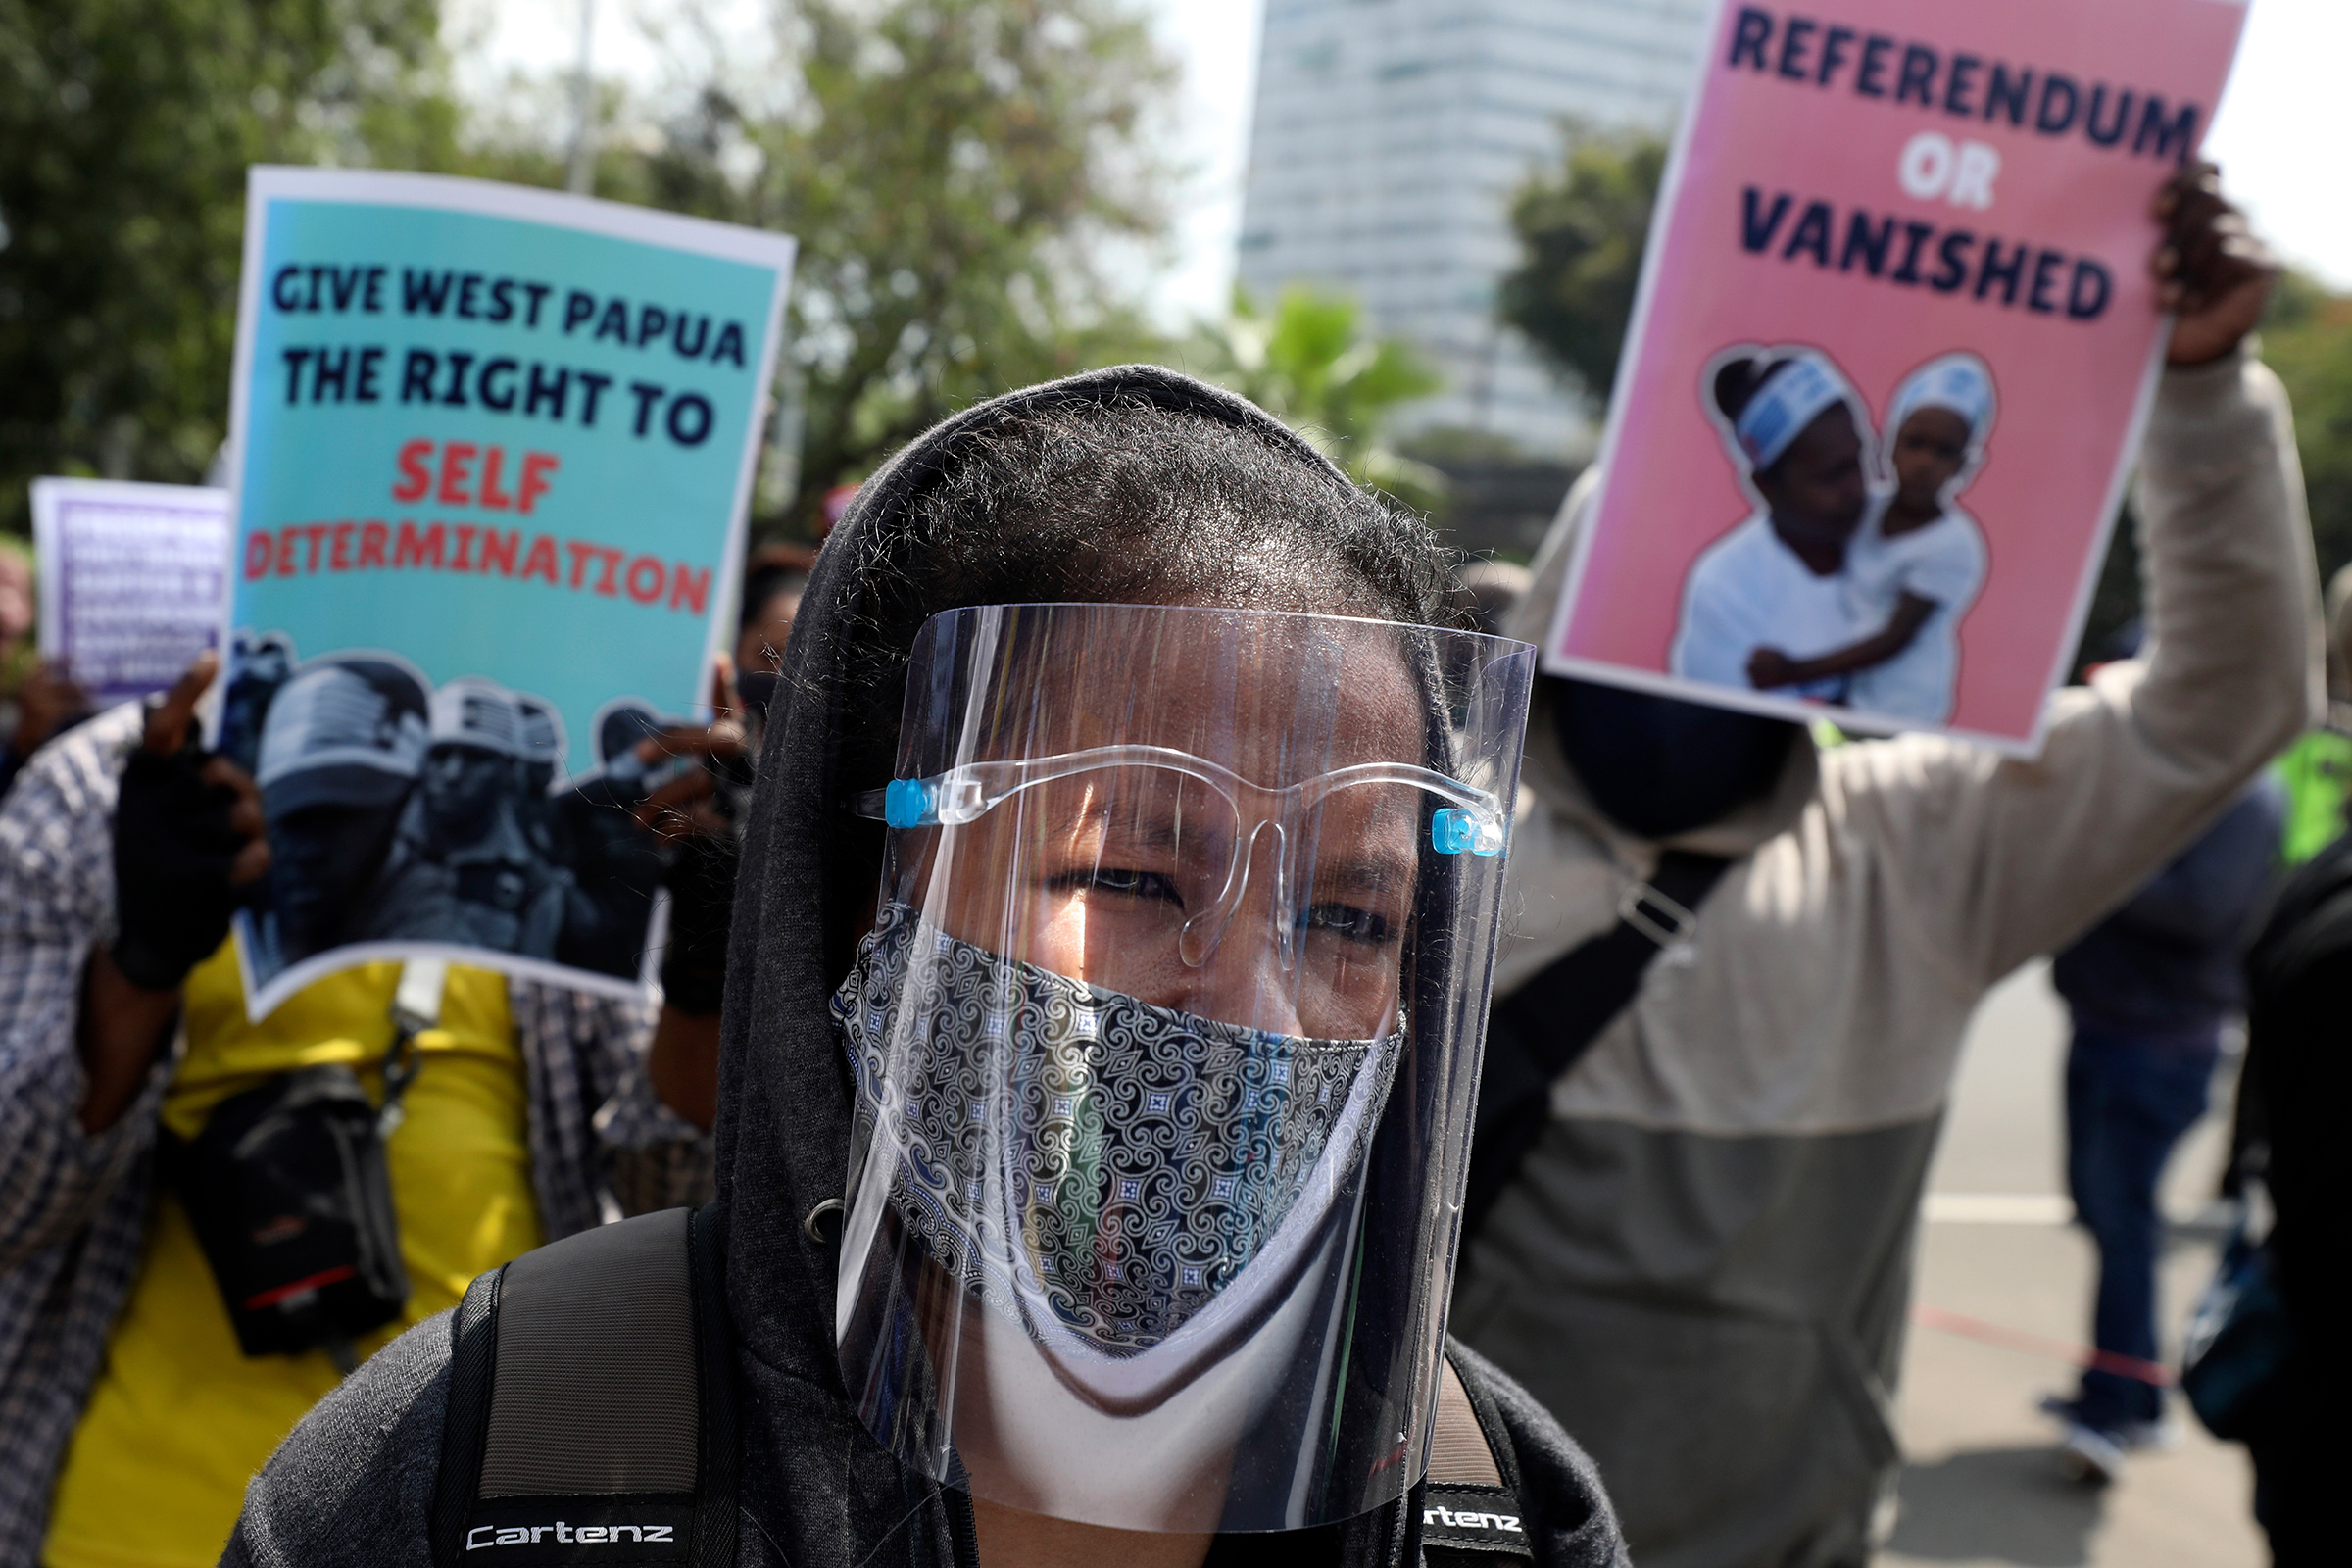 A Papuan pro-independence supporter wears a face shield during a rally commemorating the 58th anniversary of the New York Agreement outside the U.S. Embassy in Jakarta on Aug. 15. The agreement, signed by the Netherlands and Indonesia in 1962, led to Indonesia taking over West Papua from Dutch colonial rule in 1963